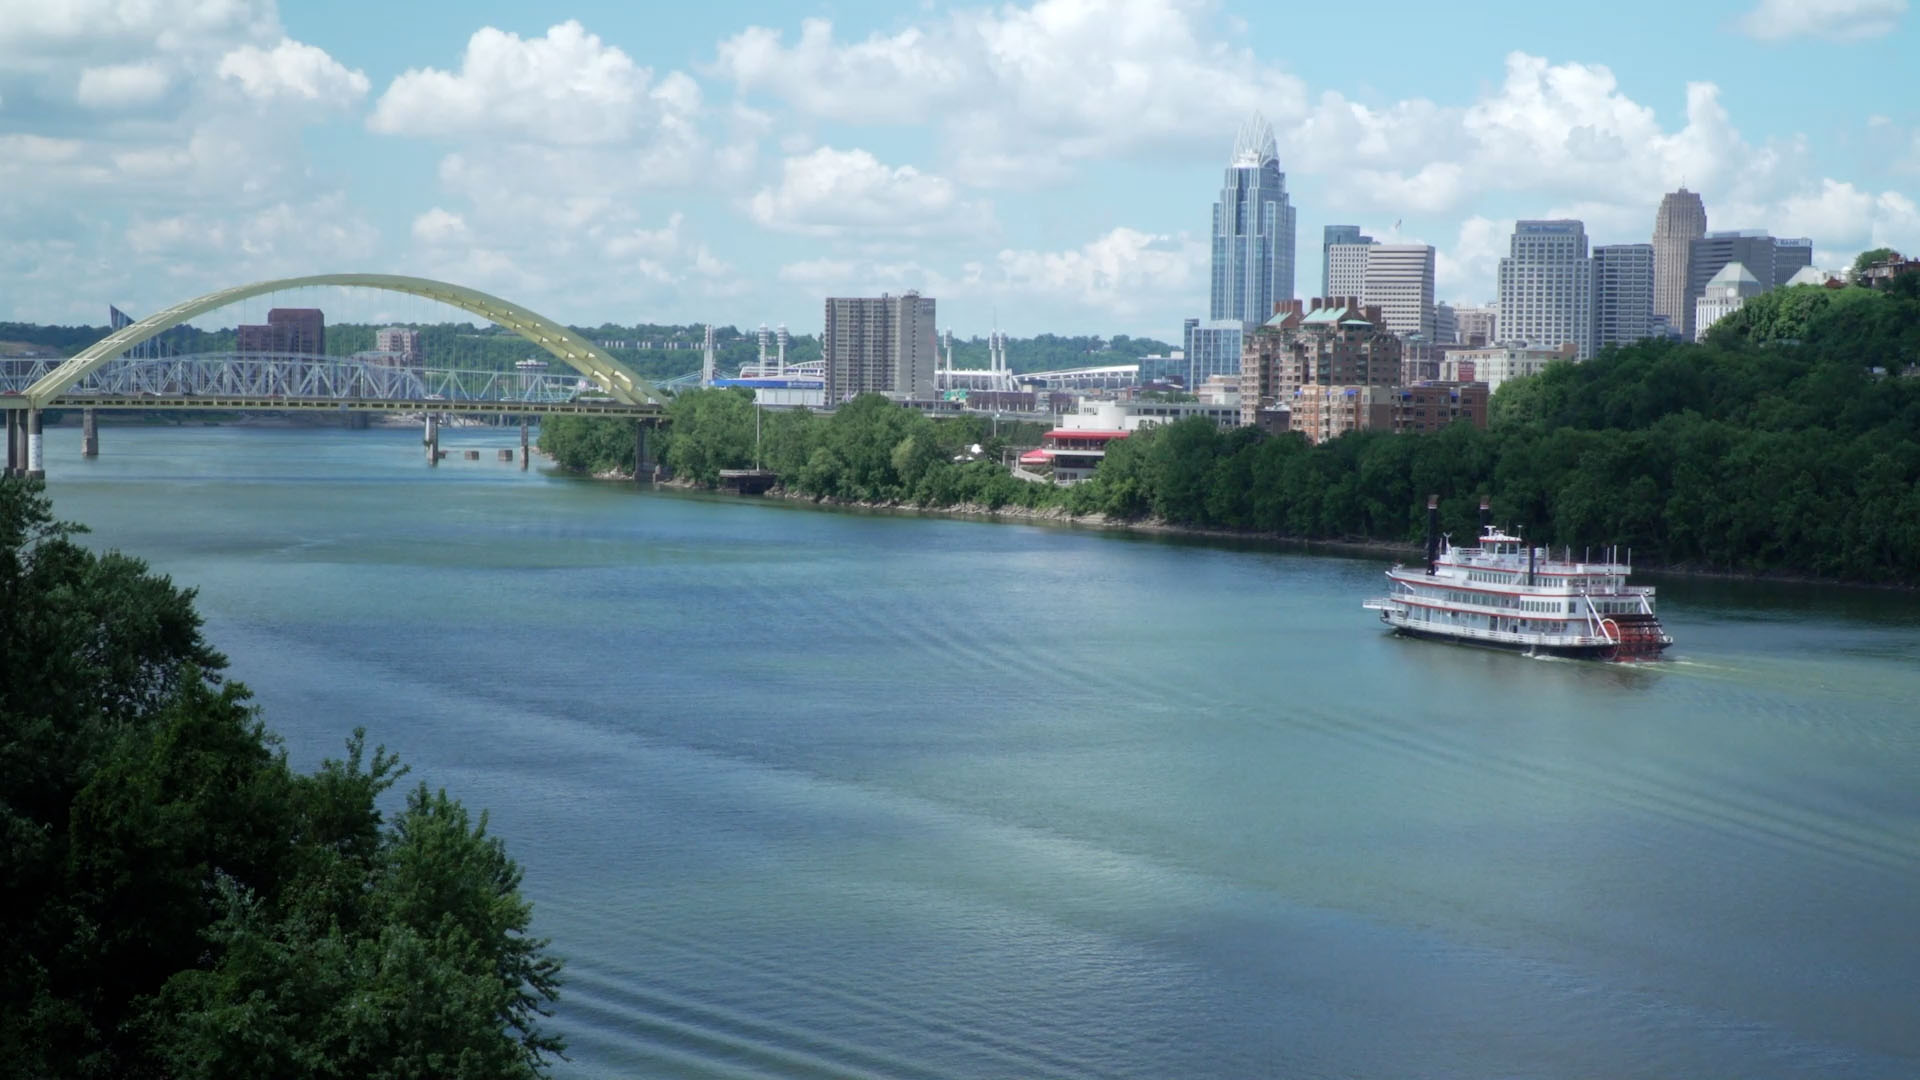 Drone footage of the Ohio River from Beyond the Curb.